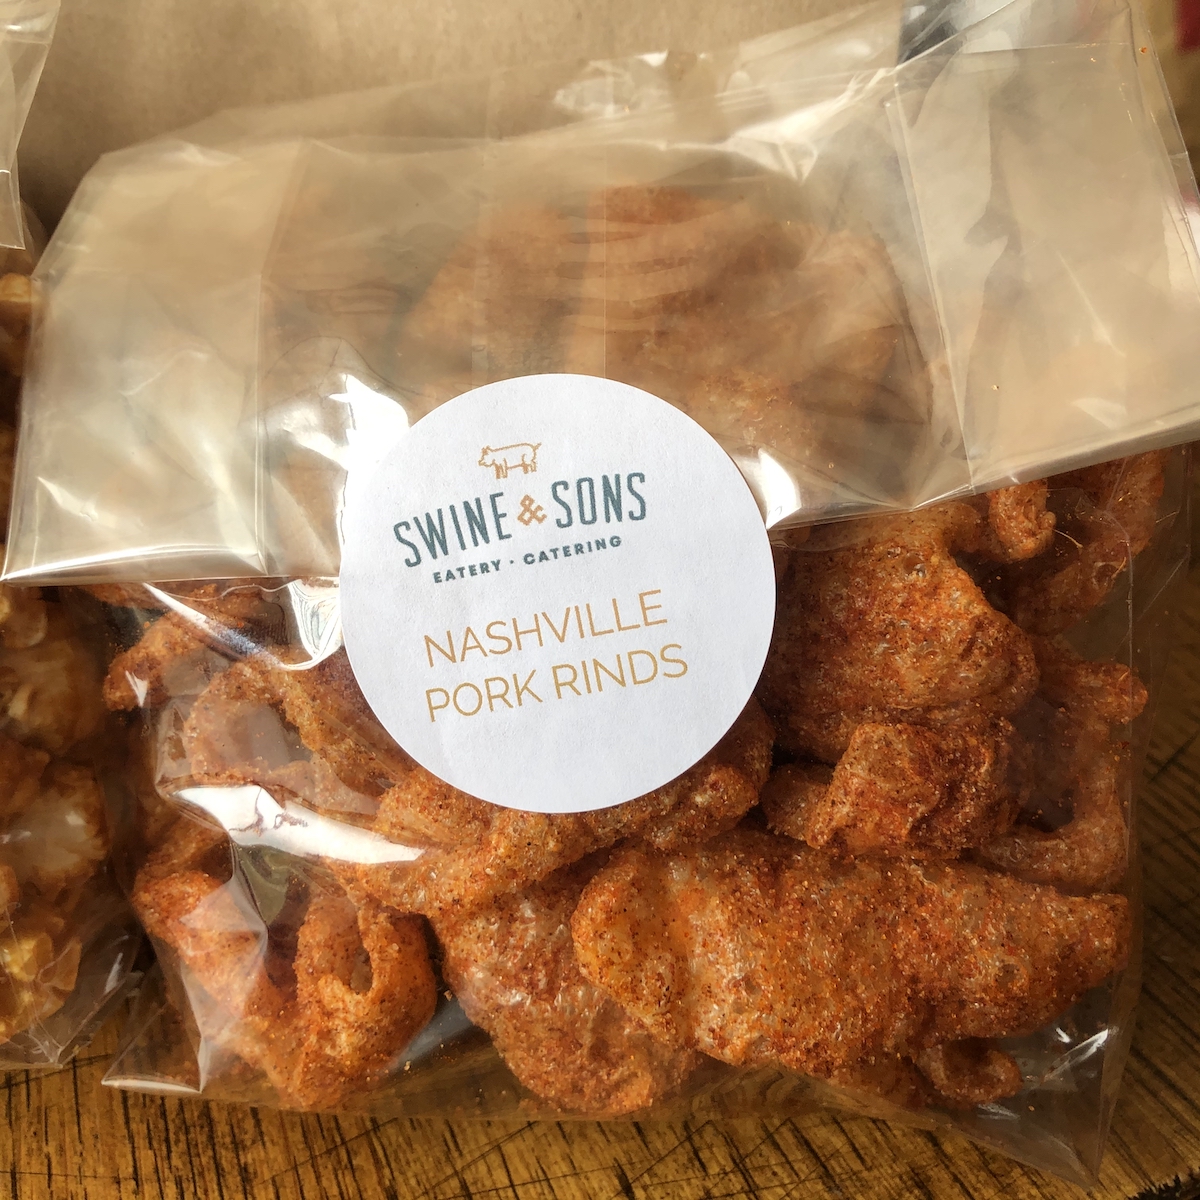 Nashville Pork Rinds from Swine and Sons in Orlando, Florida